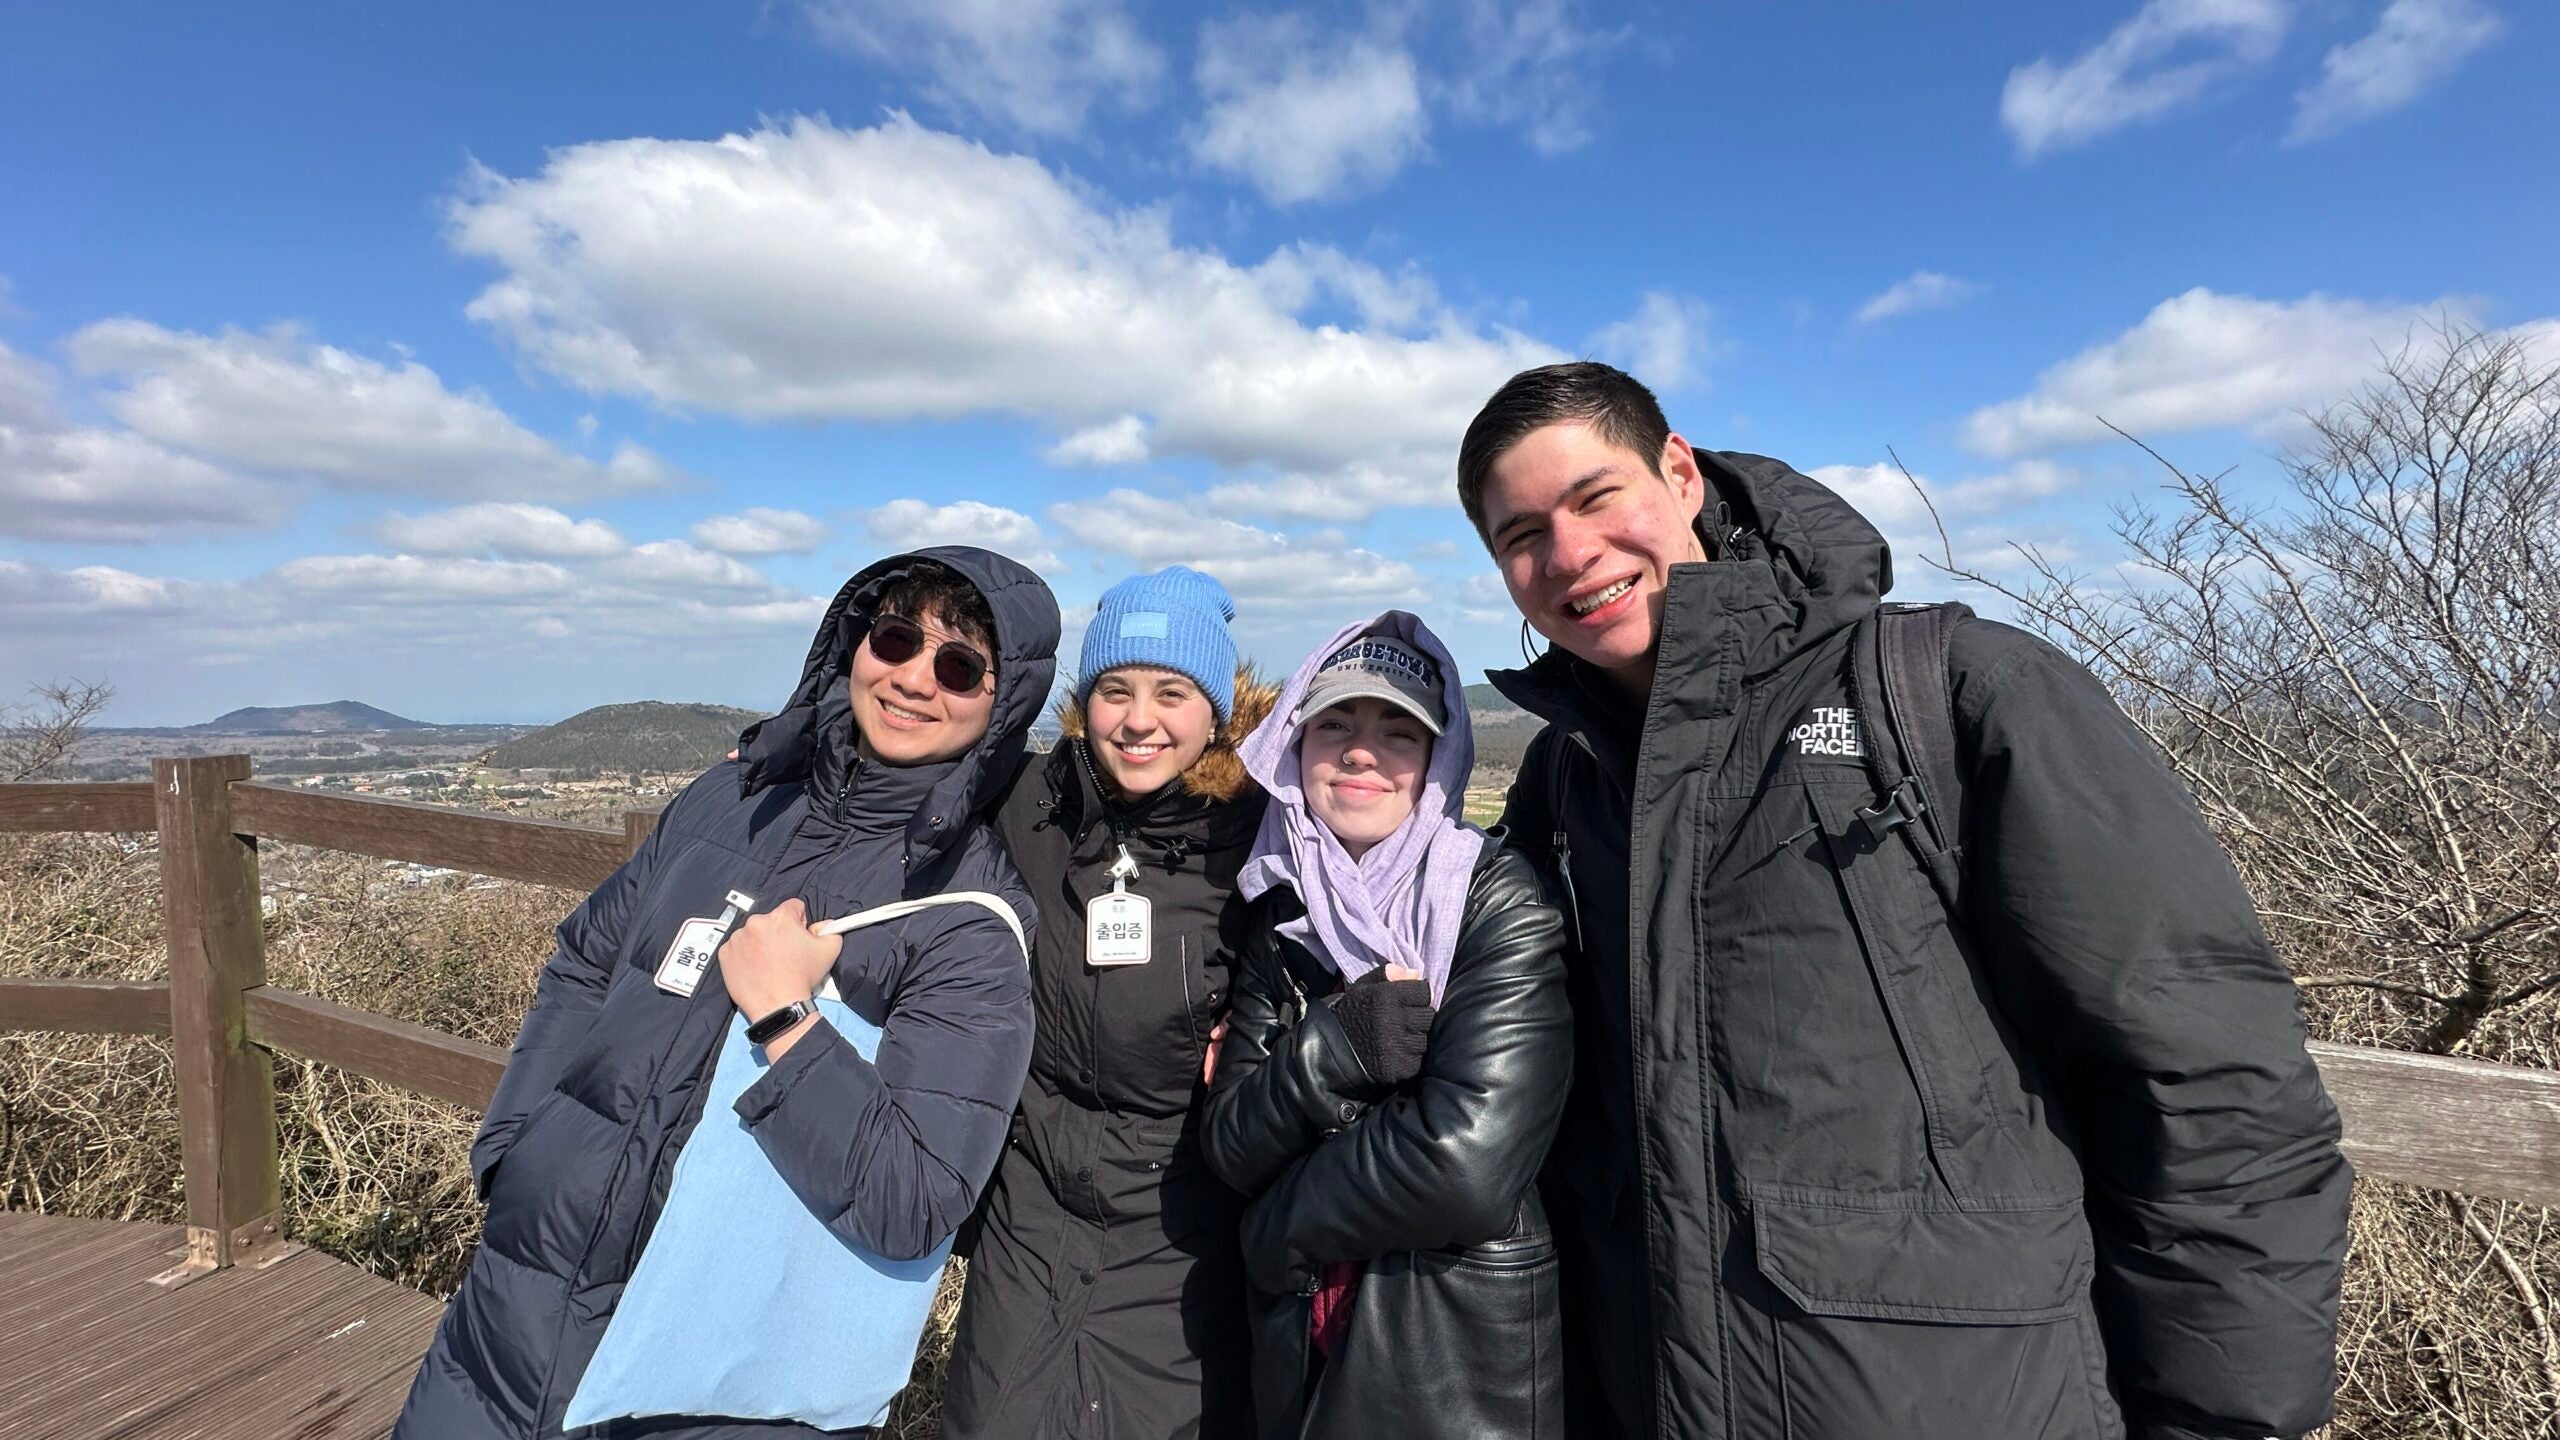 4 classmates pose for picture during hike on mountain. 